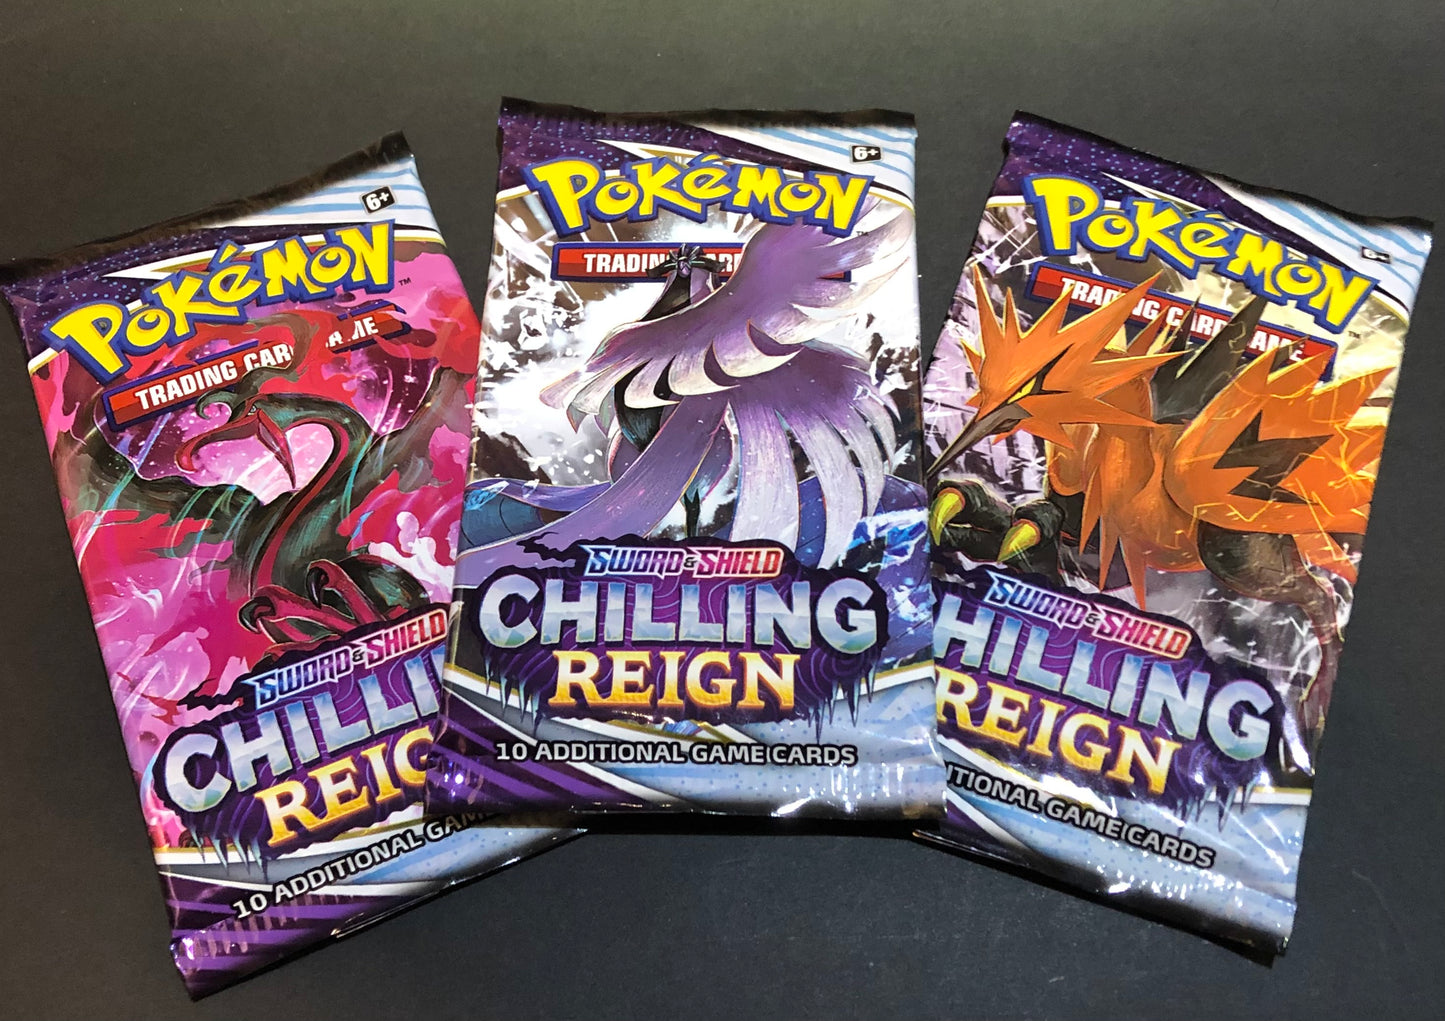 Pokémon TCG: Sword & Shield: Chilling Reign Booster Pack: 3 Pack